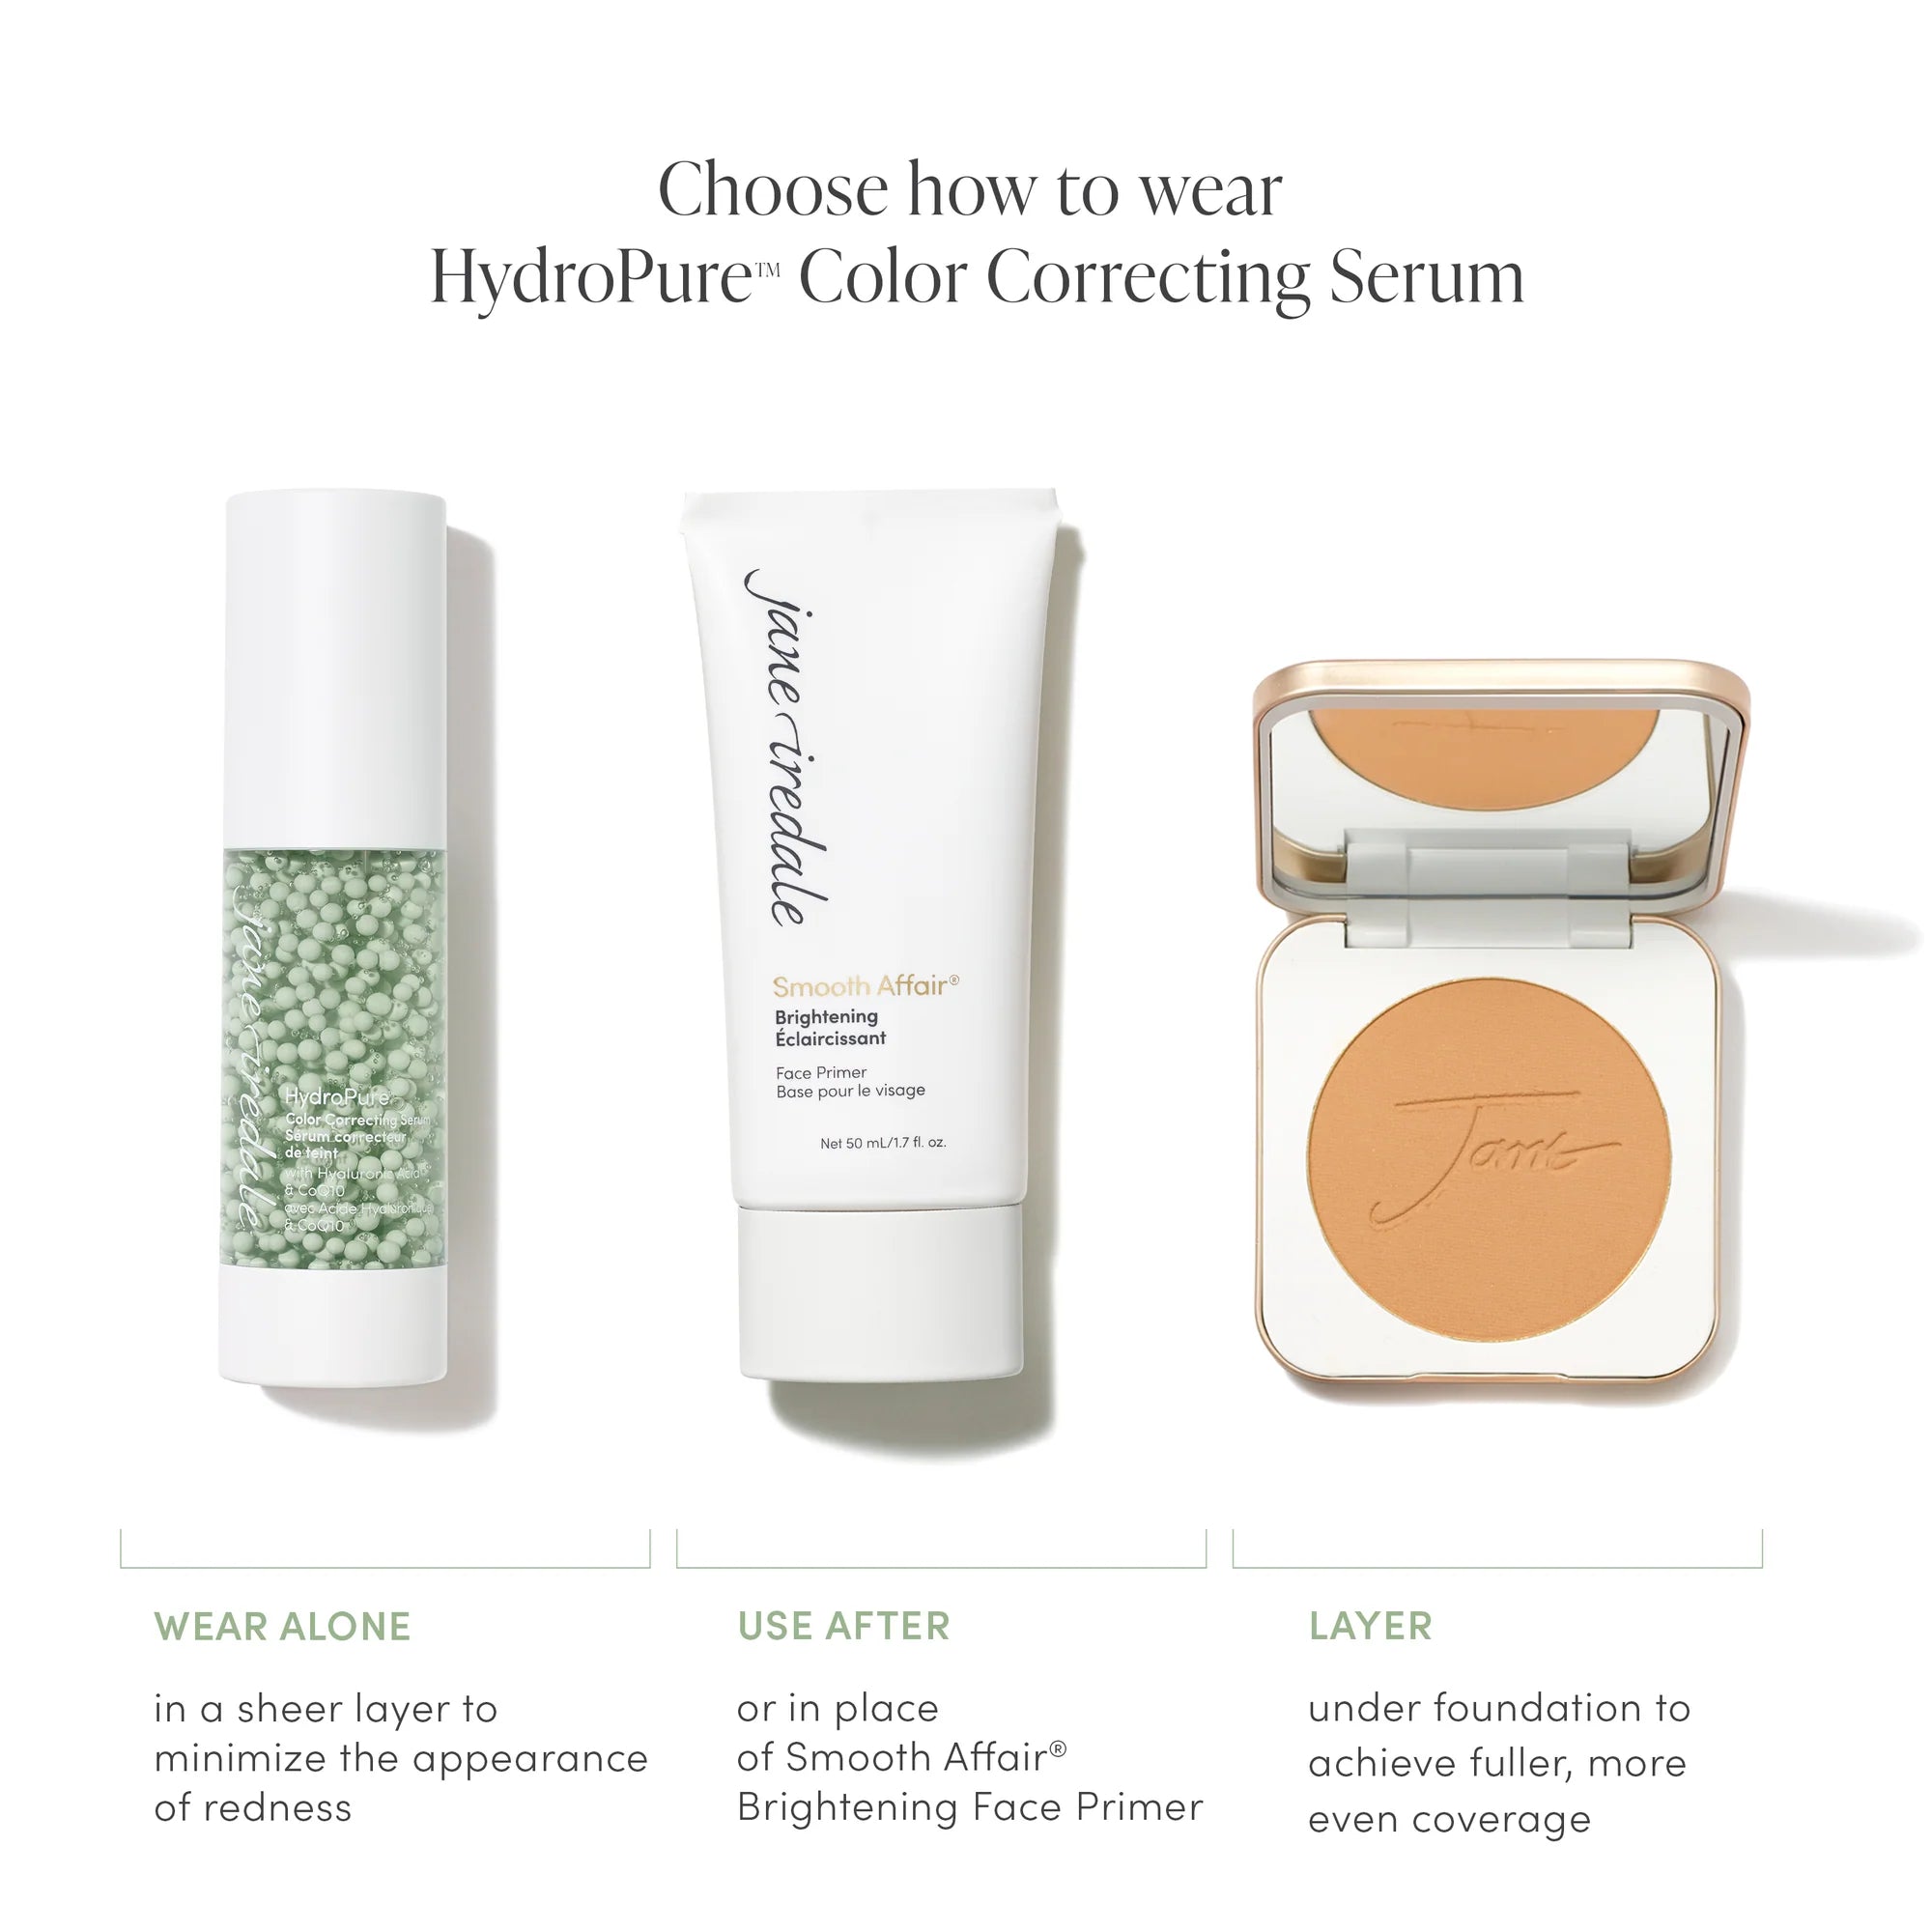 Jane Iredale's HydroPure™ Color Correcting Serum with Hyaluronic Acid & CoQ10 - how to wear the color correcting serum with Jane Iredale makeup or any brand of makeup